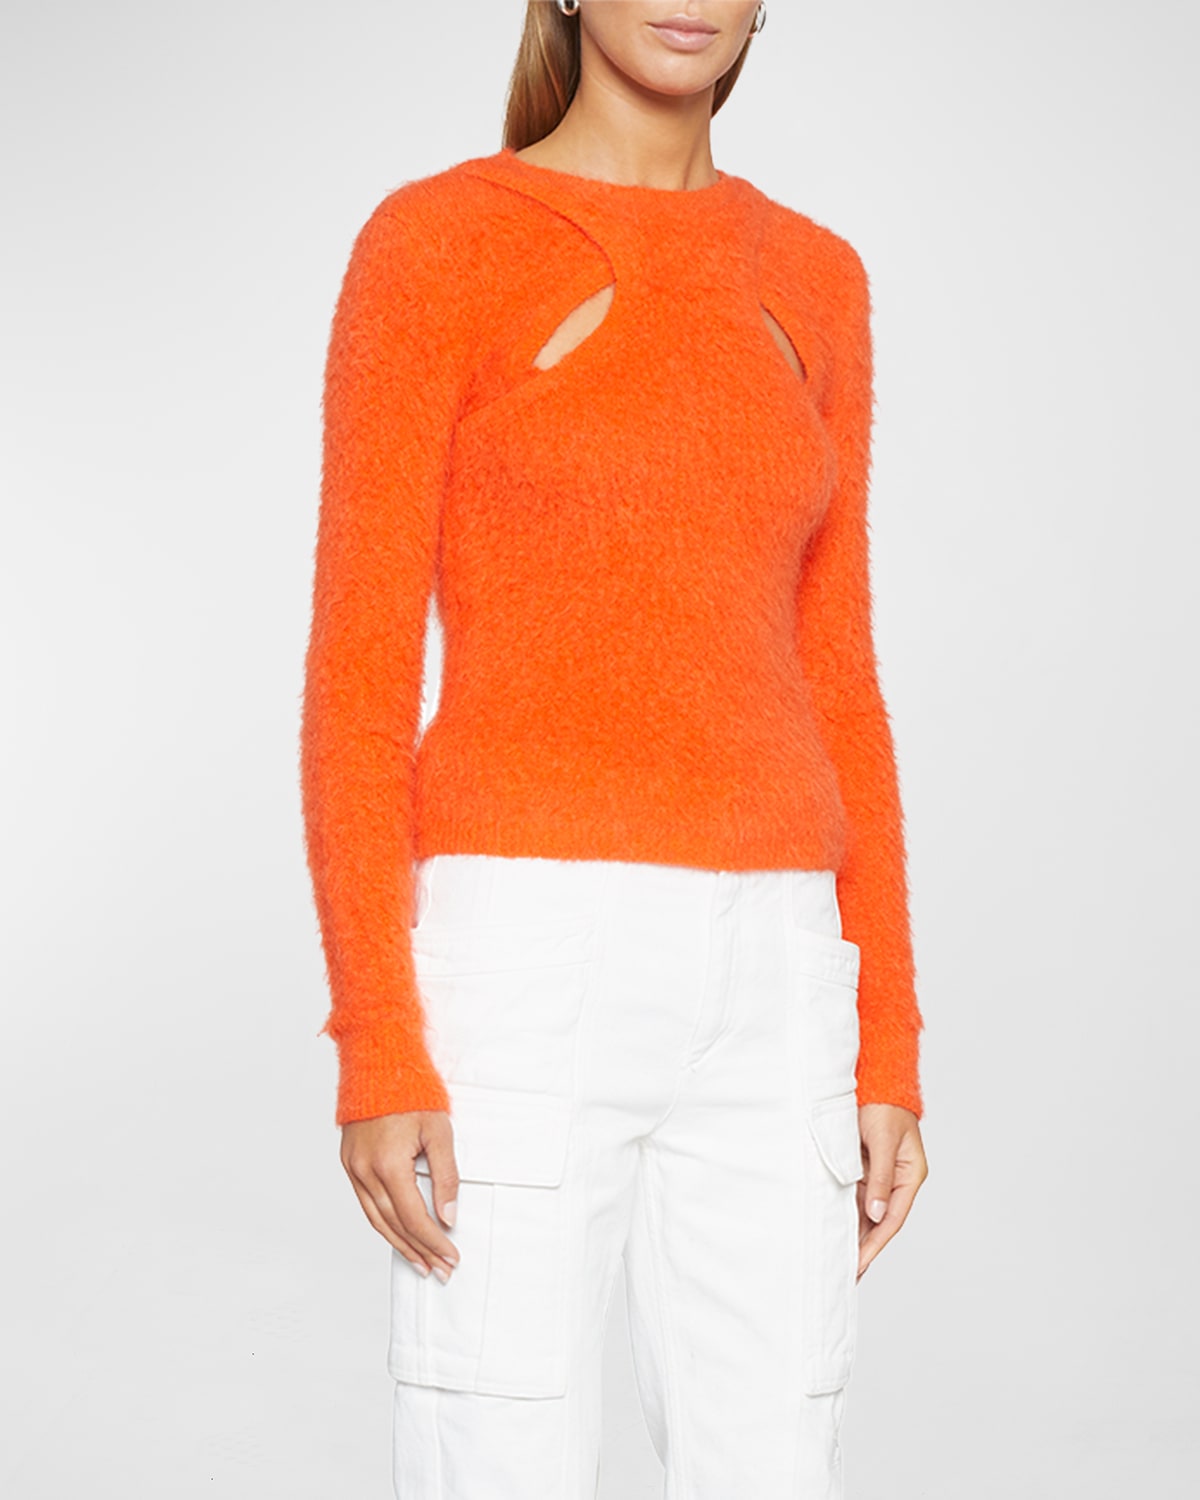 Isabel Marant Alford Cutout Layered Fuzzy Knit Sweater